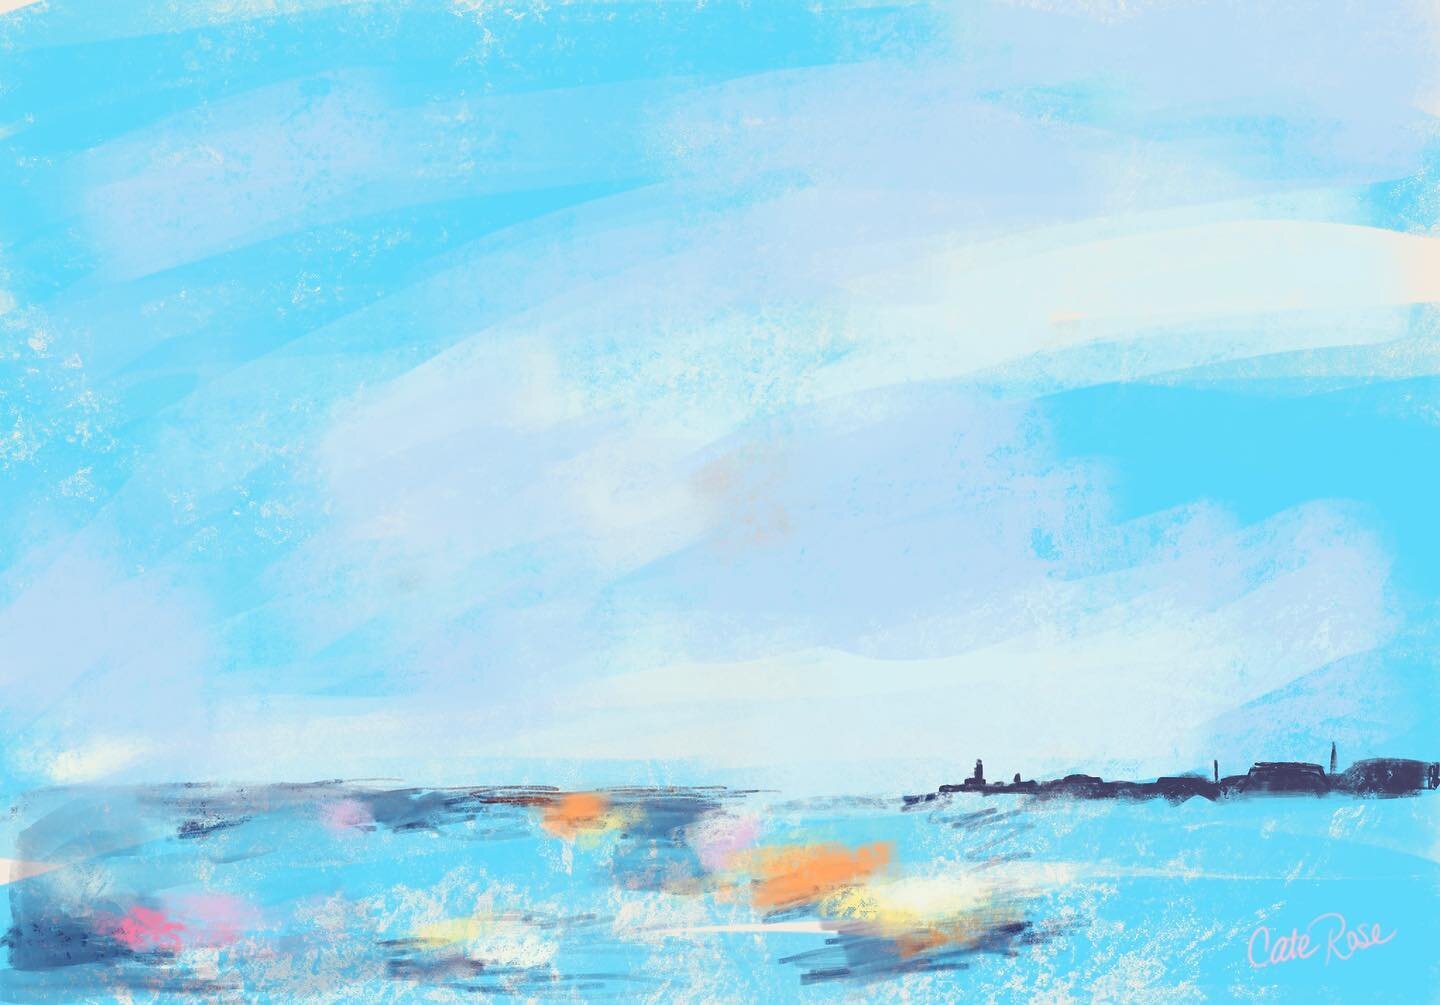 Fremantle is my home town and I love it.  The lighthouse shows the safe way home.  View of the lighthouse under an ever changing coloured sky from Bathers Beach.  #pastels #home #landscape #bluesky #ocean #perthartist #landscapepainting  #oceanview #